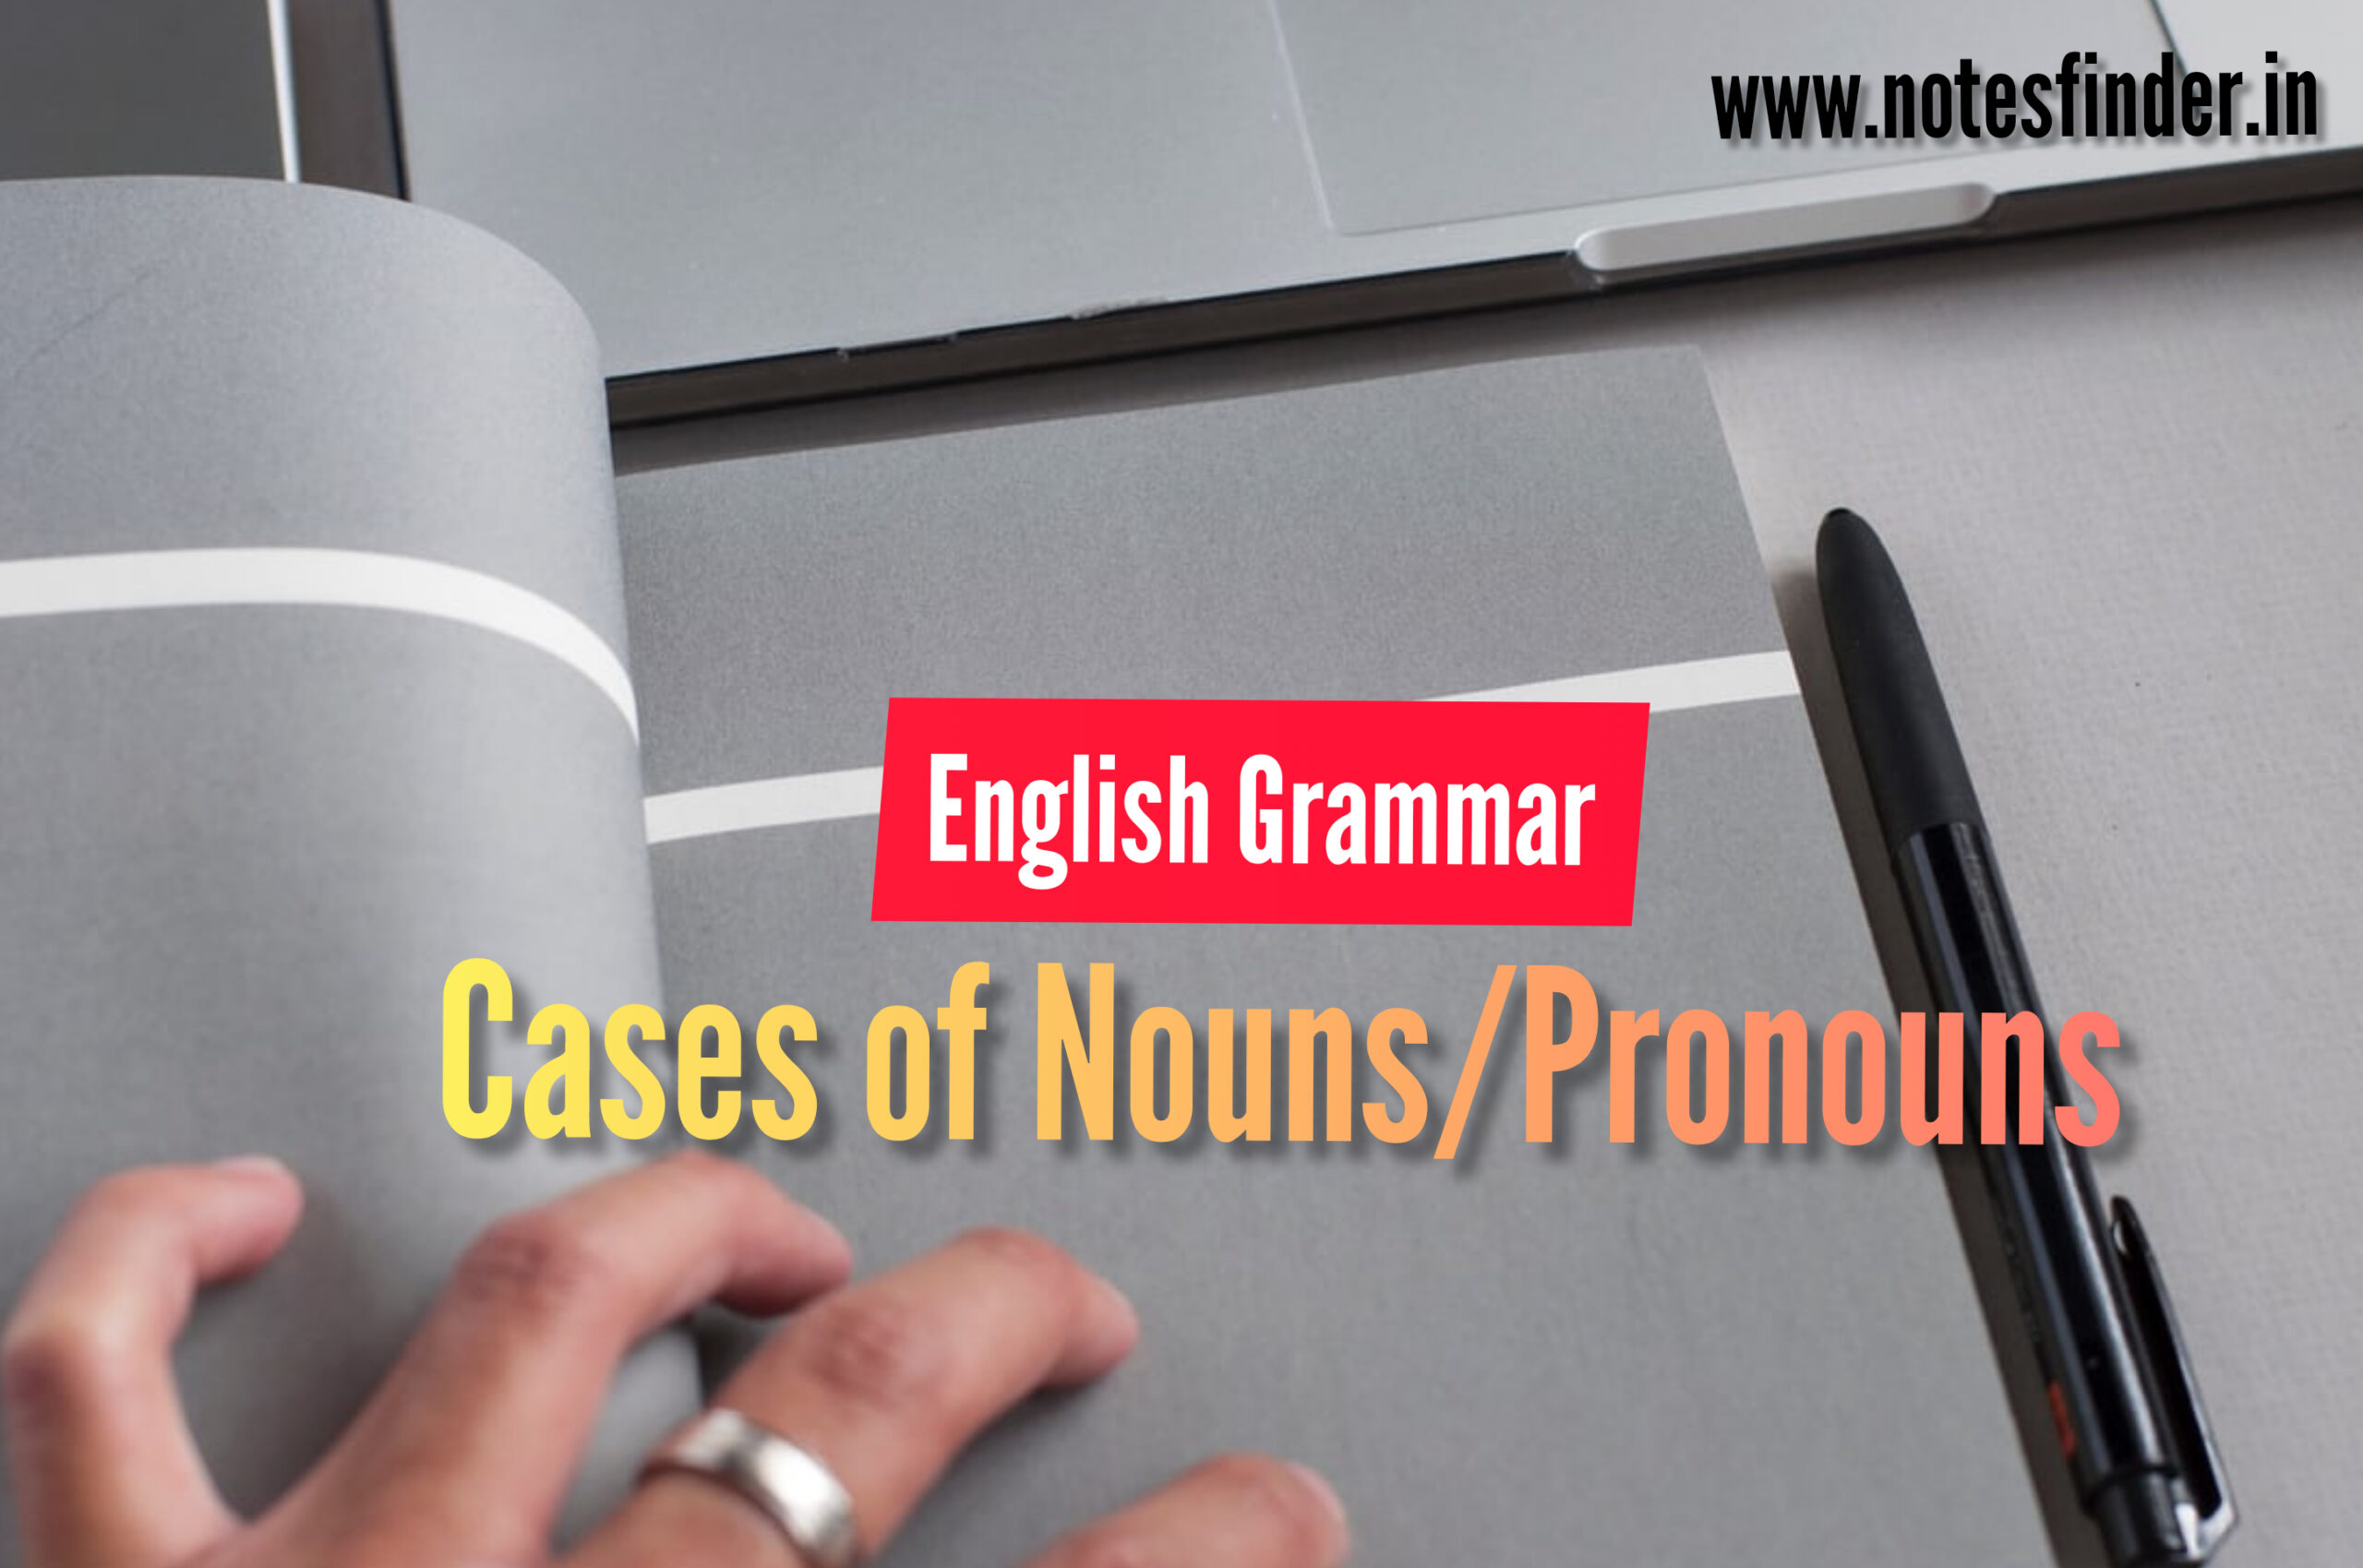 Cases of Nouns